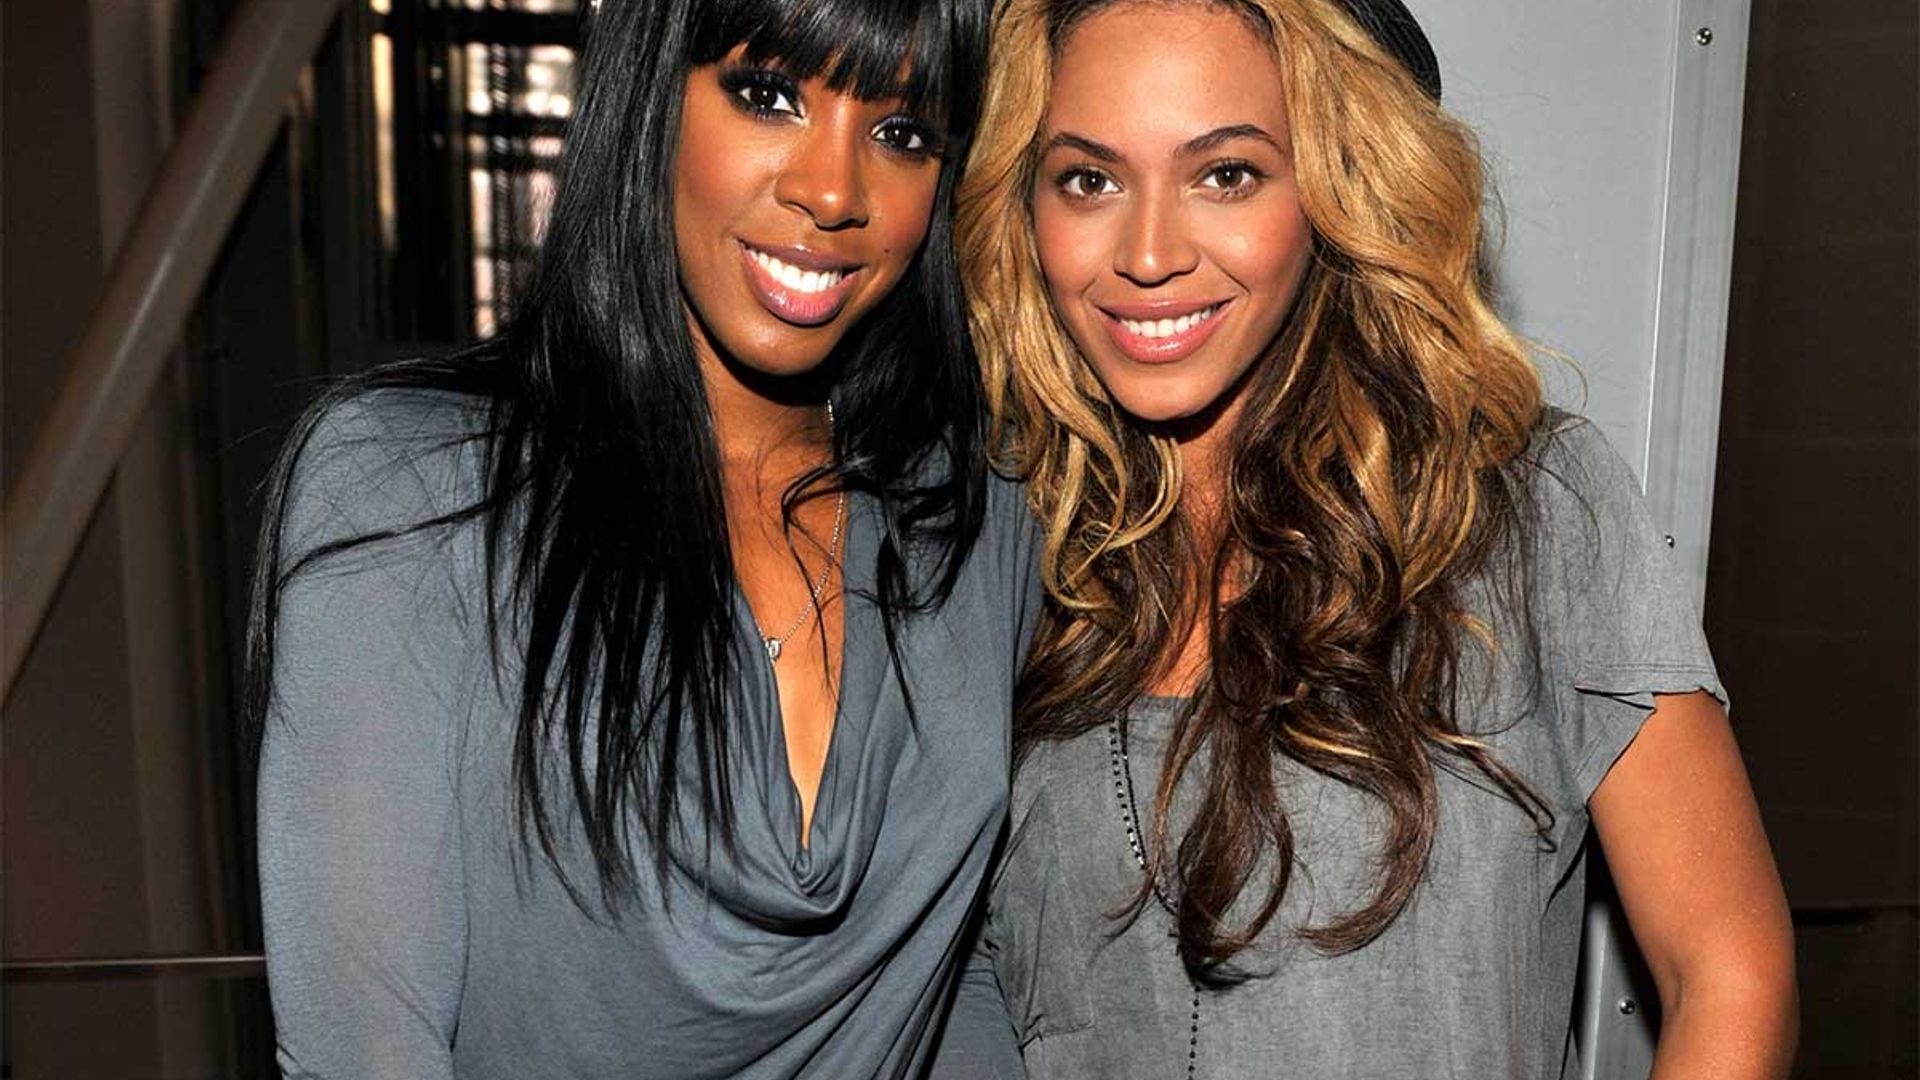 Beyoncé sings with Kelly Rowland's son during Destiny's Child reunion – and it's too cute